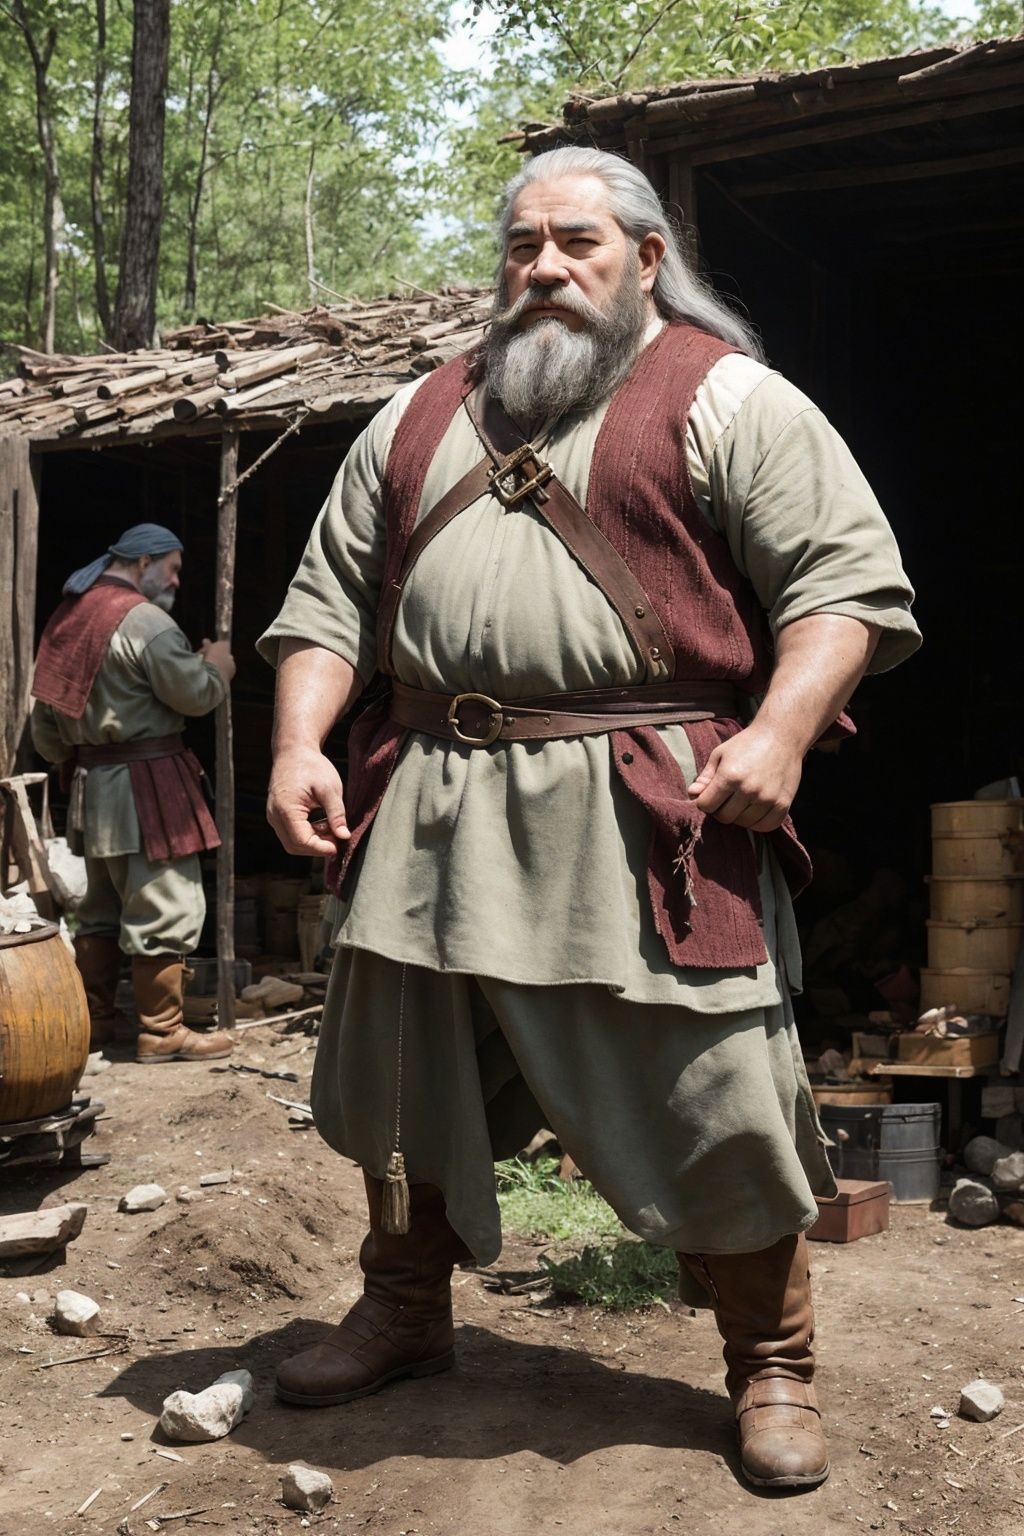 Dwarves are a fictional character archetype that typically have short but robust bodies and are known for their incredible strength. Their skin color is usually gray or brown, and their hair is typically dark brown or auburn and short and stout. Dwarves' features are often rugged with prominent beards or goatees, which are considered indicative of their brawn and fighting prowess. They have dark-colored eyes and heightened vision due to their long periods of subterranean living.Dwarves typically wear heavy clothing and leather goods, which are made to be durable and protective during their mining and crafting processes. Their broad and powerful hands are highly regarded for their skilled craftsmanship, from building homes to the forging of weapons and armor.Generally, dwarves are known for their bravery and stubbornness. They value tradition, respect for the law, and family honor, which they take pride in. Overall, the dwarven archetype is widely used in culture to represent a variety of characters, including warriors, miners, craftsmen, and elites in various fields.The gentle sunshine and natural scenery under the sunlight: The sunshine is a source of vitality for life. It shines on all things in nature, makes all plants and trees full of vitality, and gives natural scenery a gentle and warm aesthetic.